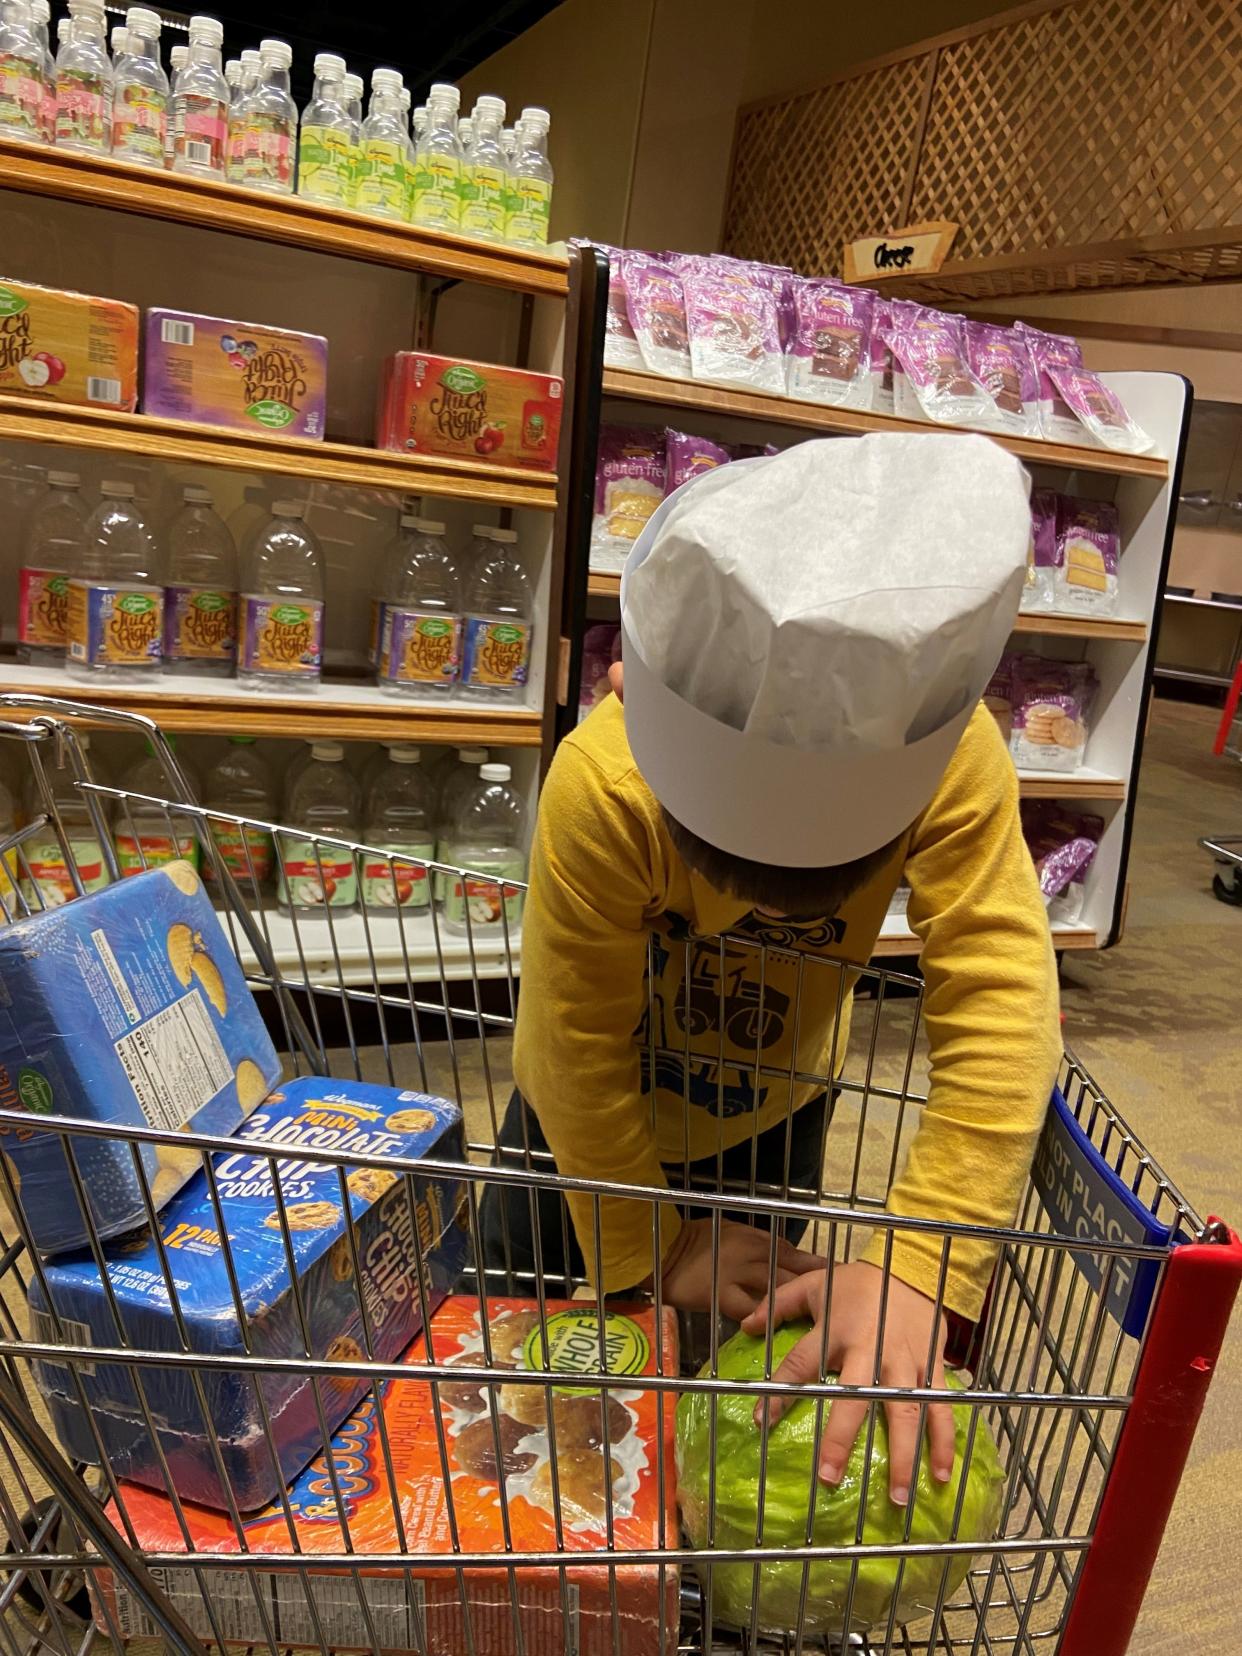 The Wegmans Super Kids Market exhibit at The Strong National Museum of Play allows kids to play as grown ups at a Rochester institution. There, young visitors can shop for replicas of their favorite foods and act as cashiers at working check-out counters.